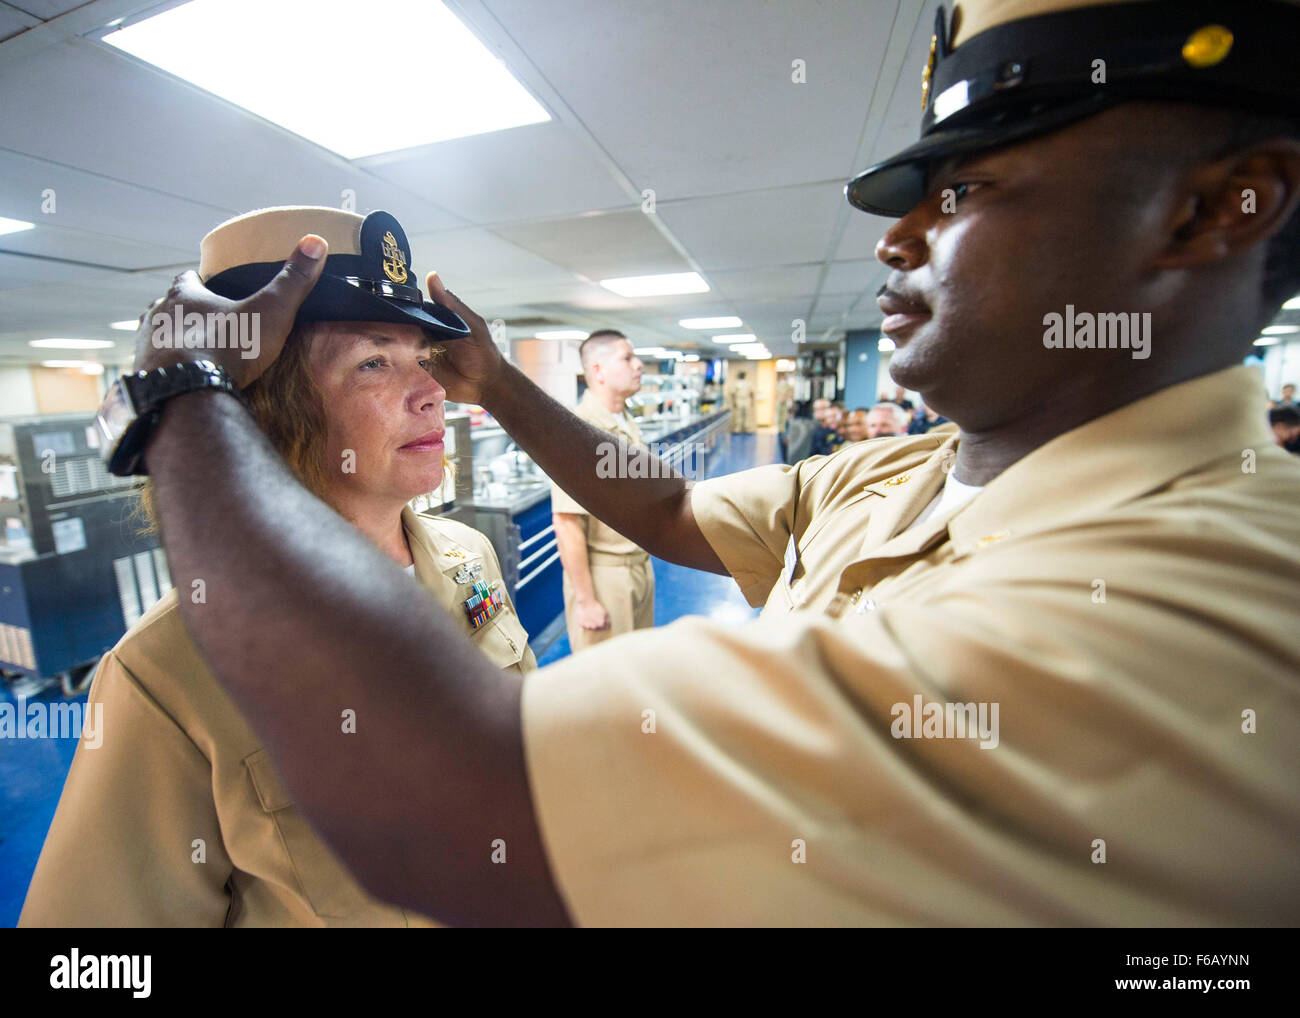 150915-N-XQ474-073 PORT AU PRINCE, Haiti (Sept. 16, 2015) Chief Hospital Corpsman Kevin Robinson, right, a native of Crawfordsville, Ark., assigned to Naval Medical Center Portsmouth, Va., places a combination cover on Chief Mass Communication Specialist Amy Kirk, a native of Eden, N.C., assigned to Navy Public Affairs Support Element East, Norfolk, Va., during the chief petty officer pinning ceremony aboard the Military Sealift Command hospital ship USNS Comfort (T-AH 20), during Continuing Promise 2015. Continuing Promise is a U.S. Southern Command-sponsored and U.S. Naval Forces Southern Co Stock Photo